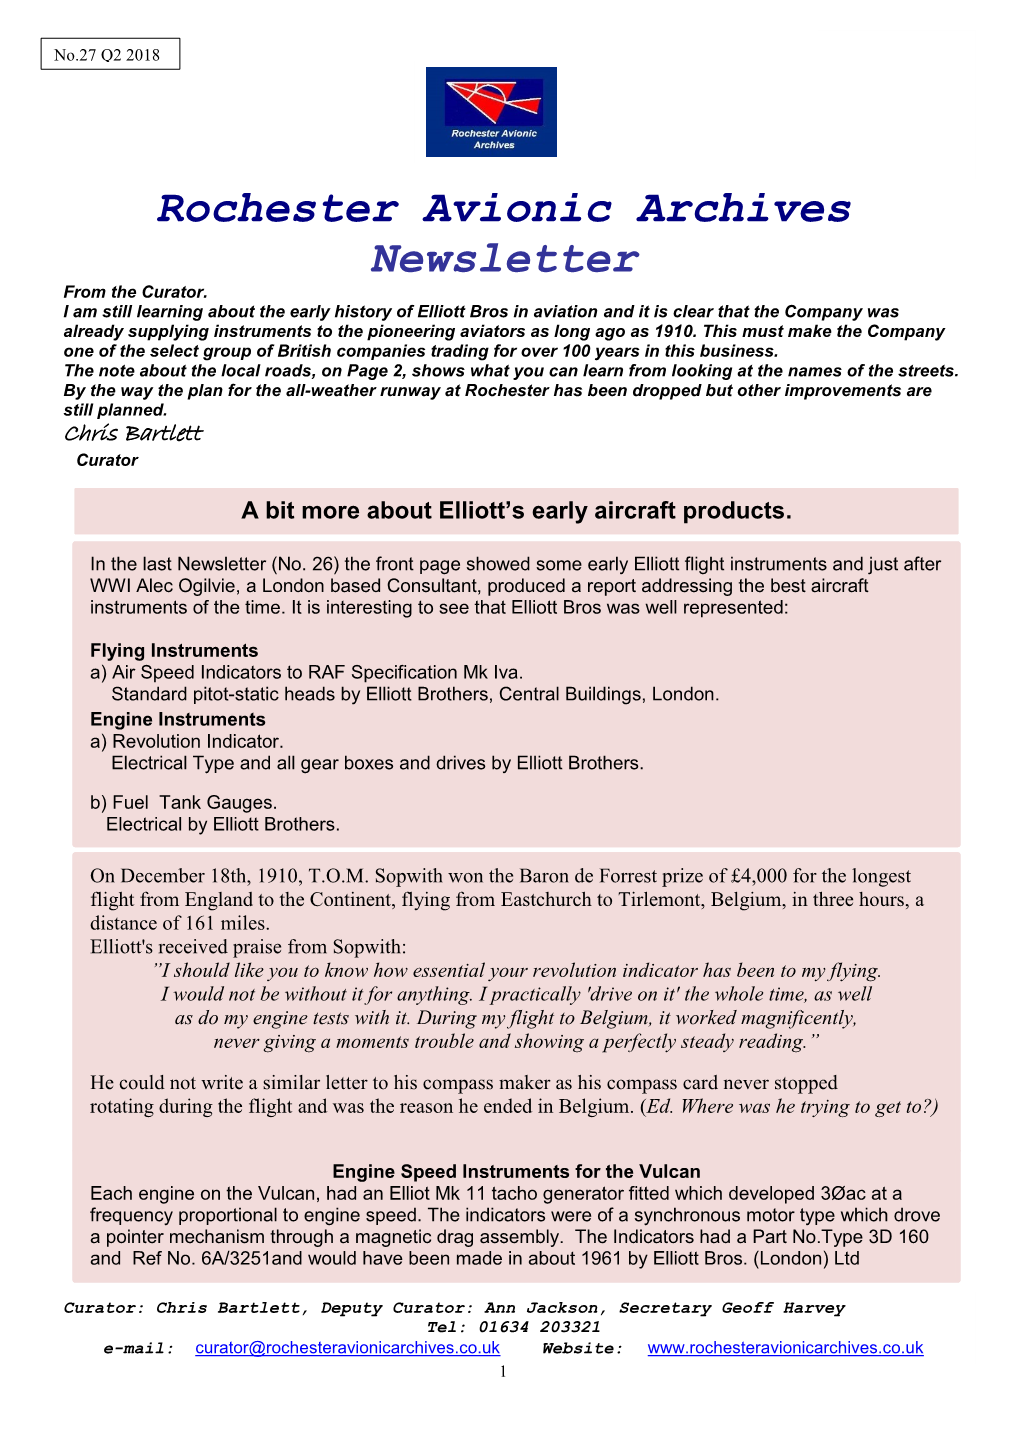 Rochester Avionic Archives Newsletter from the Curator